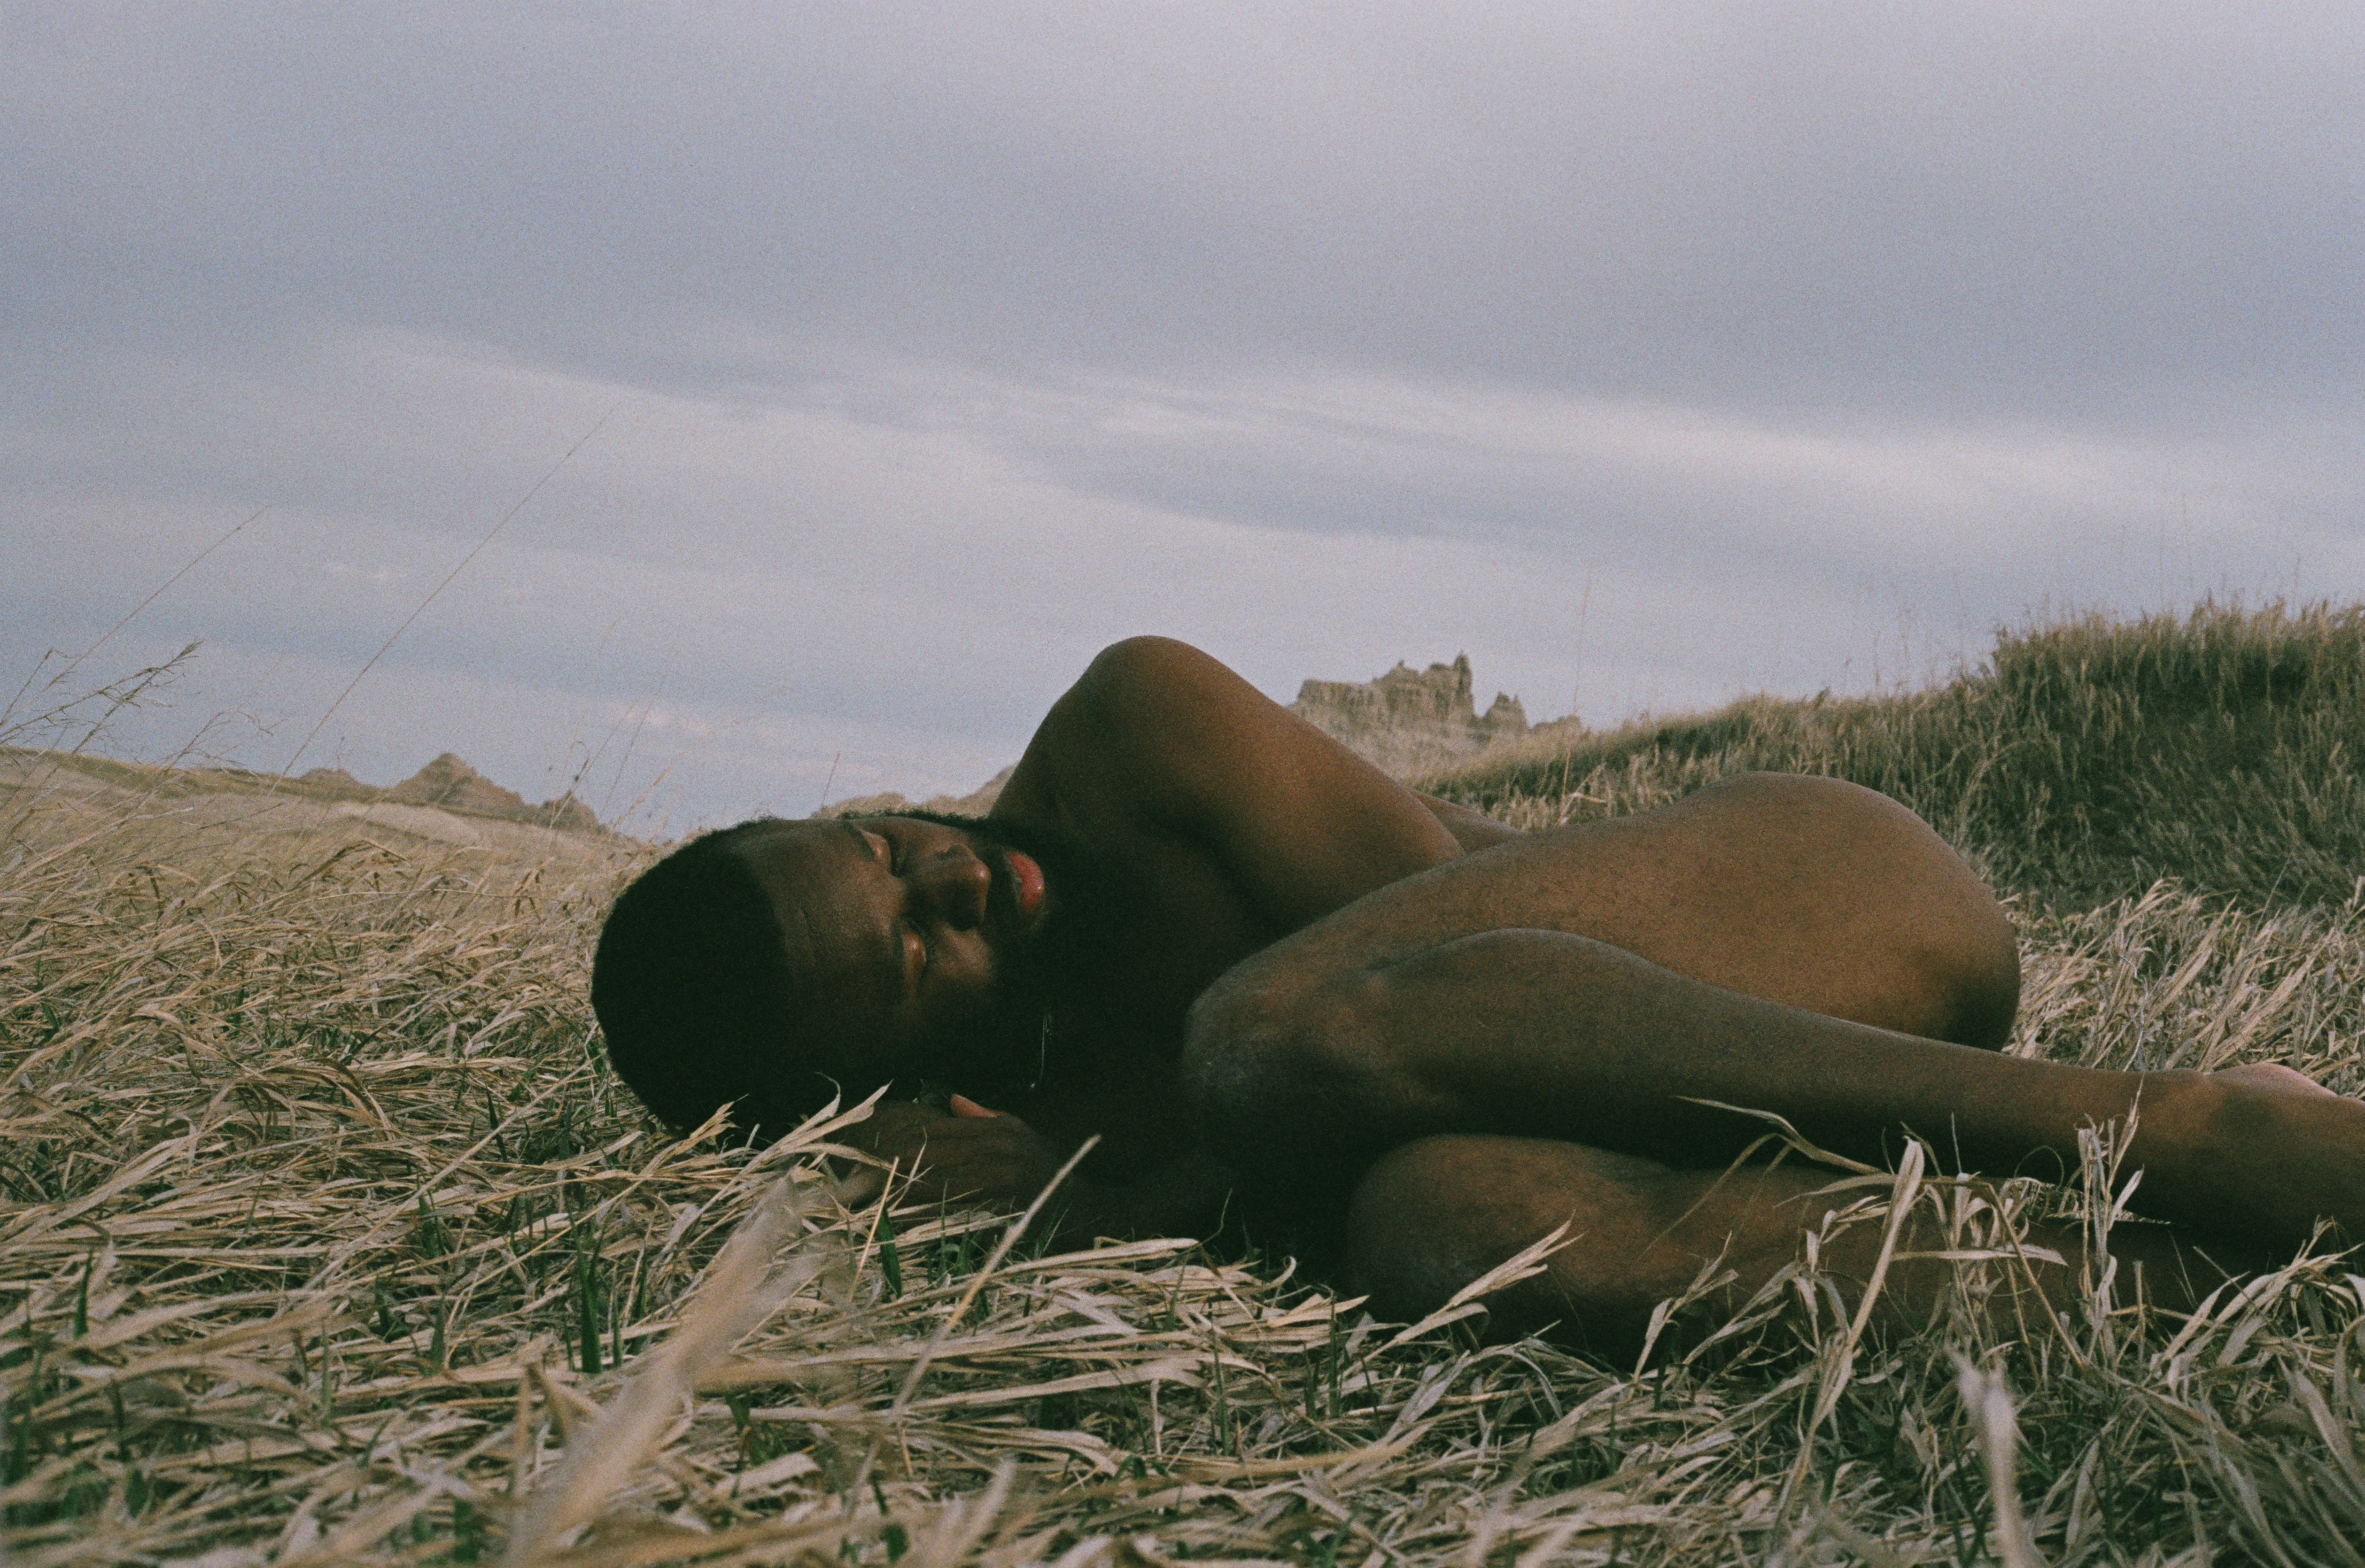 Unclothed man in fetal position in a field